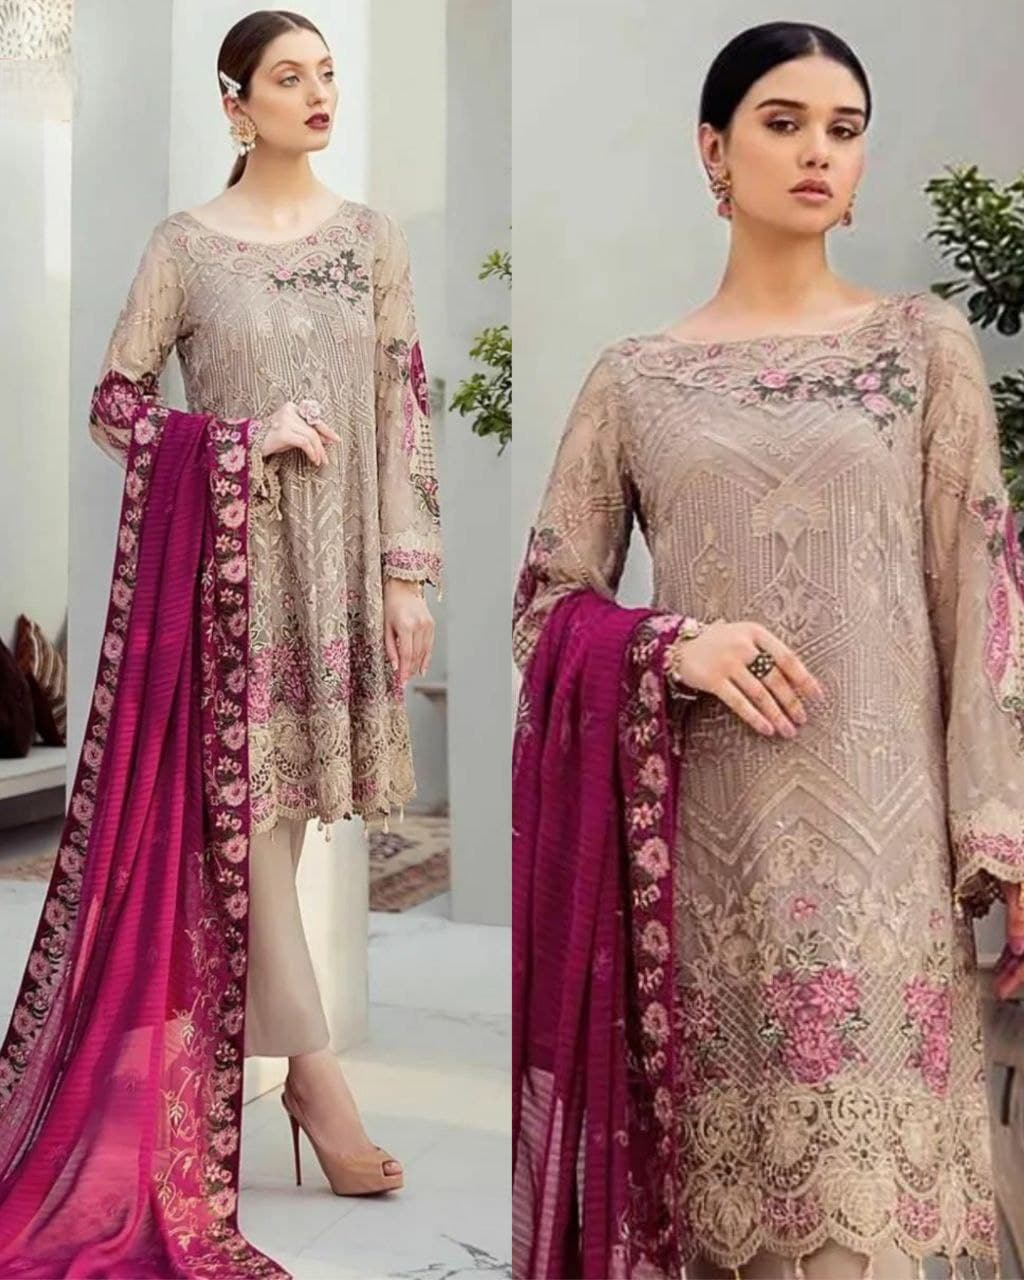 Aromatic Pure Georgette Embroidery Work Pakistani Salwar Suit With Dupatta (LQAF1016)